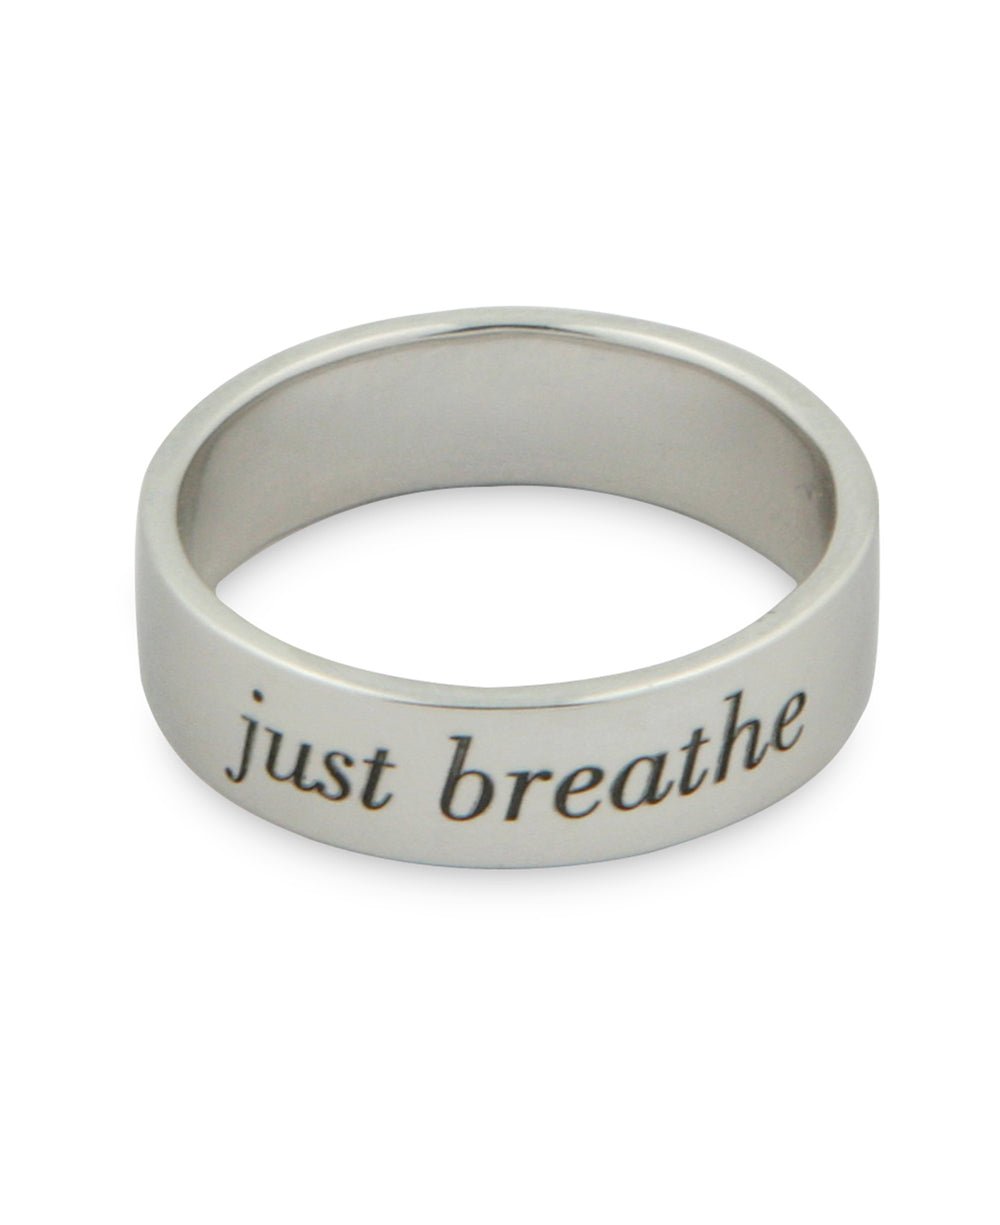 Inspirational Jewelry, Sterling Silver Ring, Just Breathe - Rings Size 6